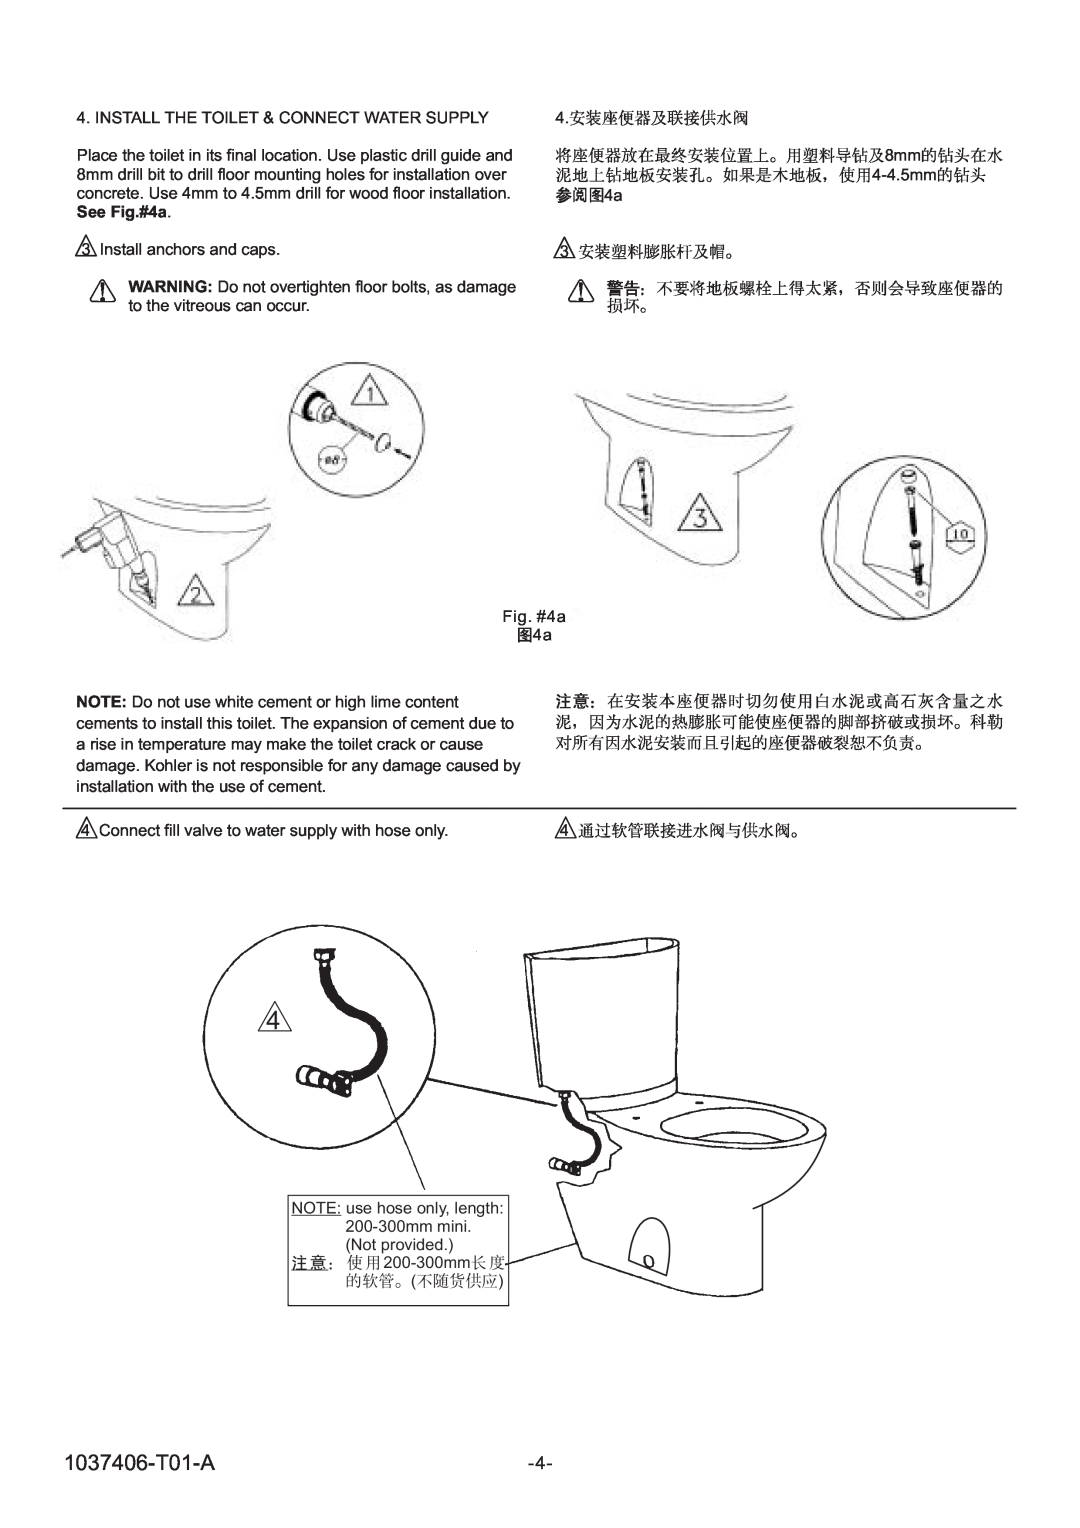 Kohler K-8709T, K-8766T, K-8753T, K-8741T, K-8711T, K-8710T, K-8767T 1037406-T01-A, Install The Toilet & Connect Water Supply 